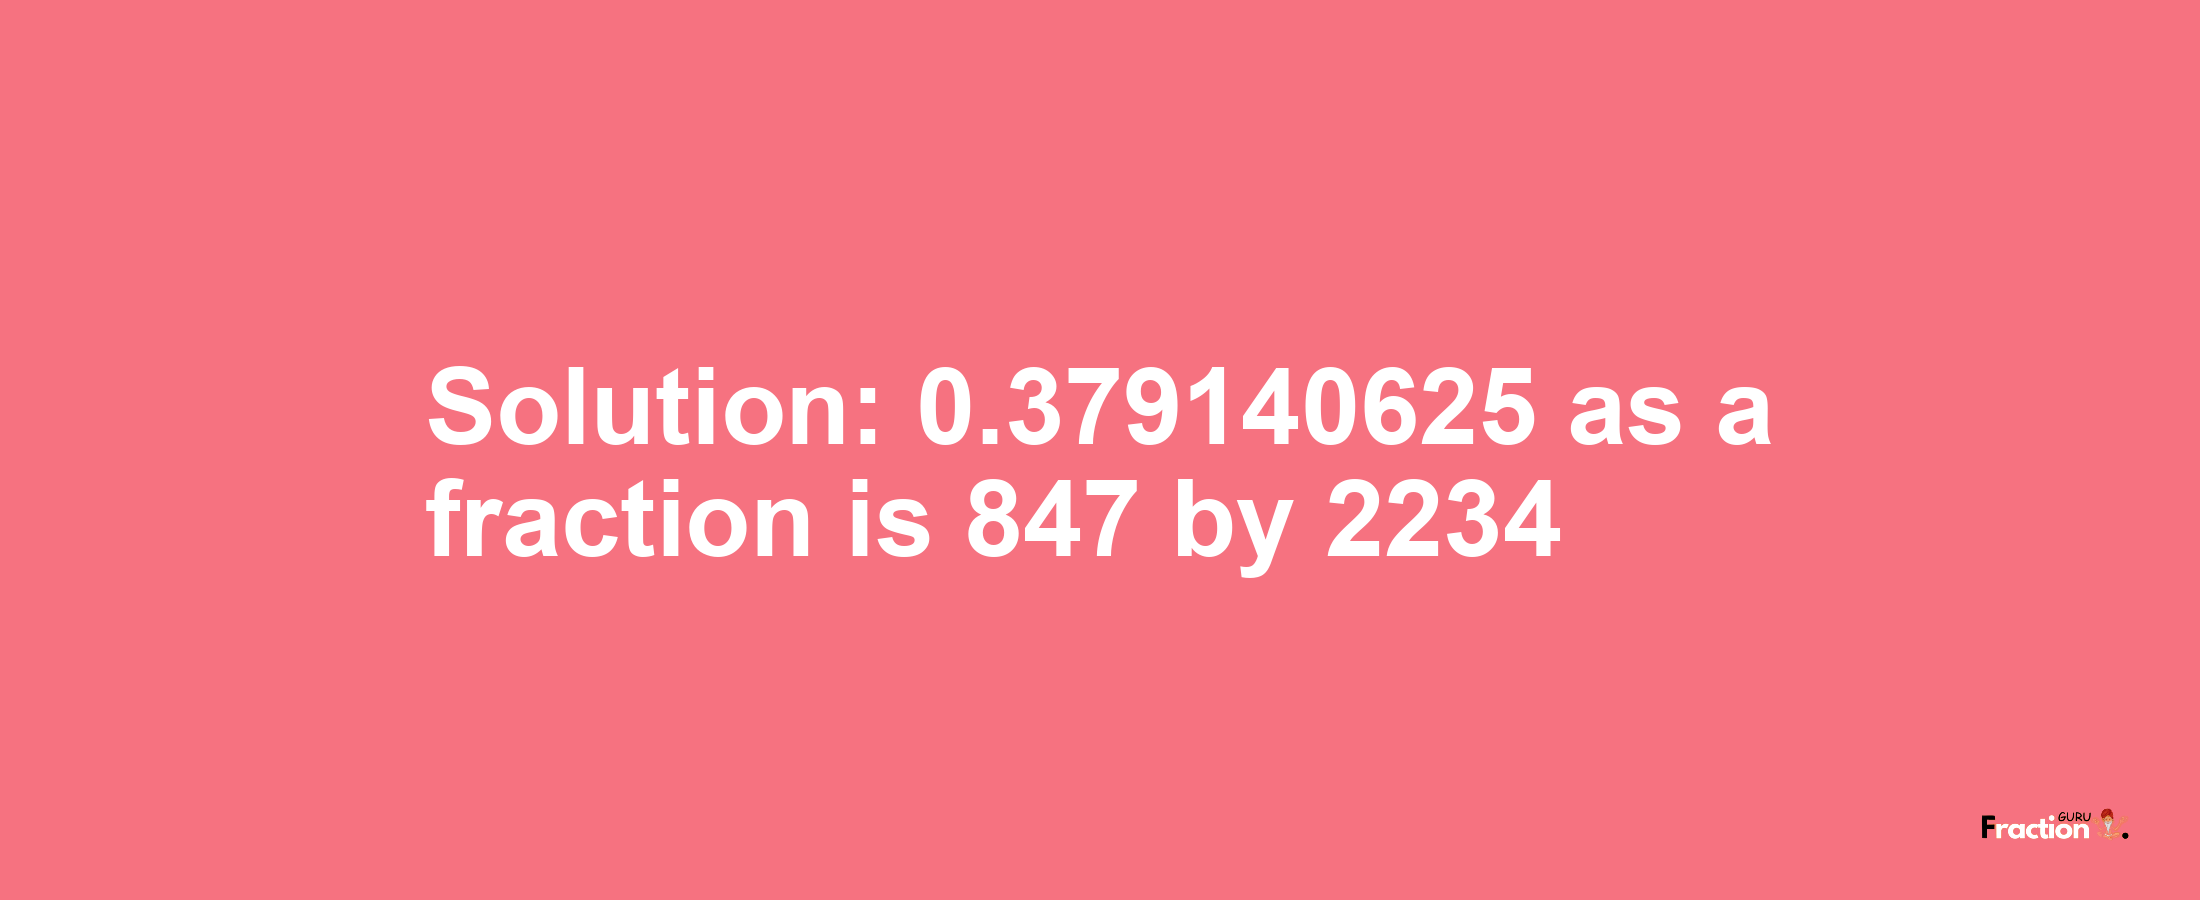 Solution:0.379140625 as a fraction is 847/2234